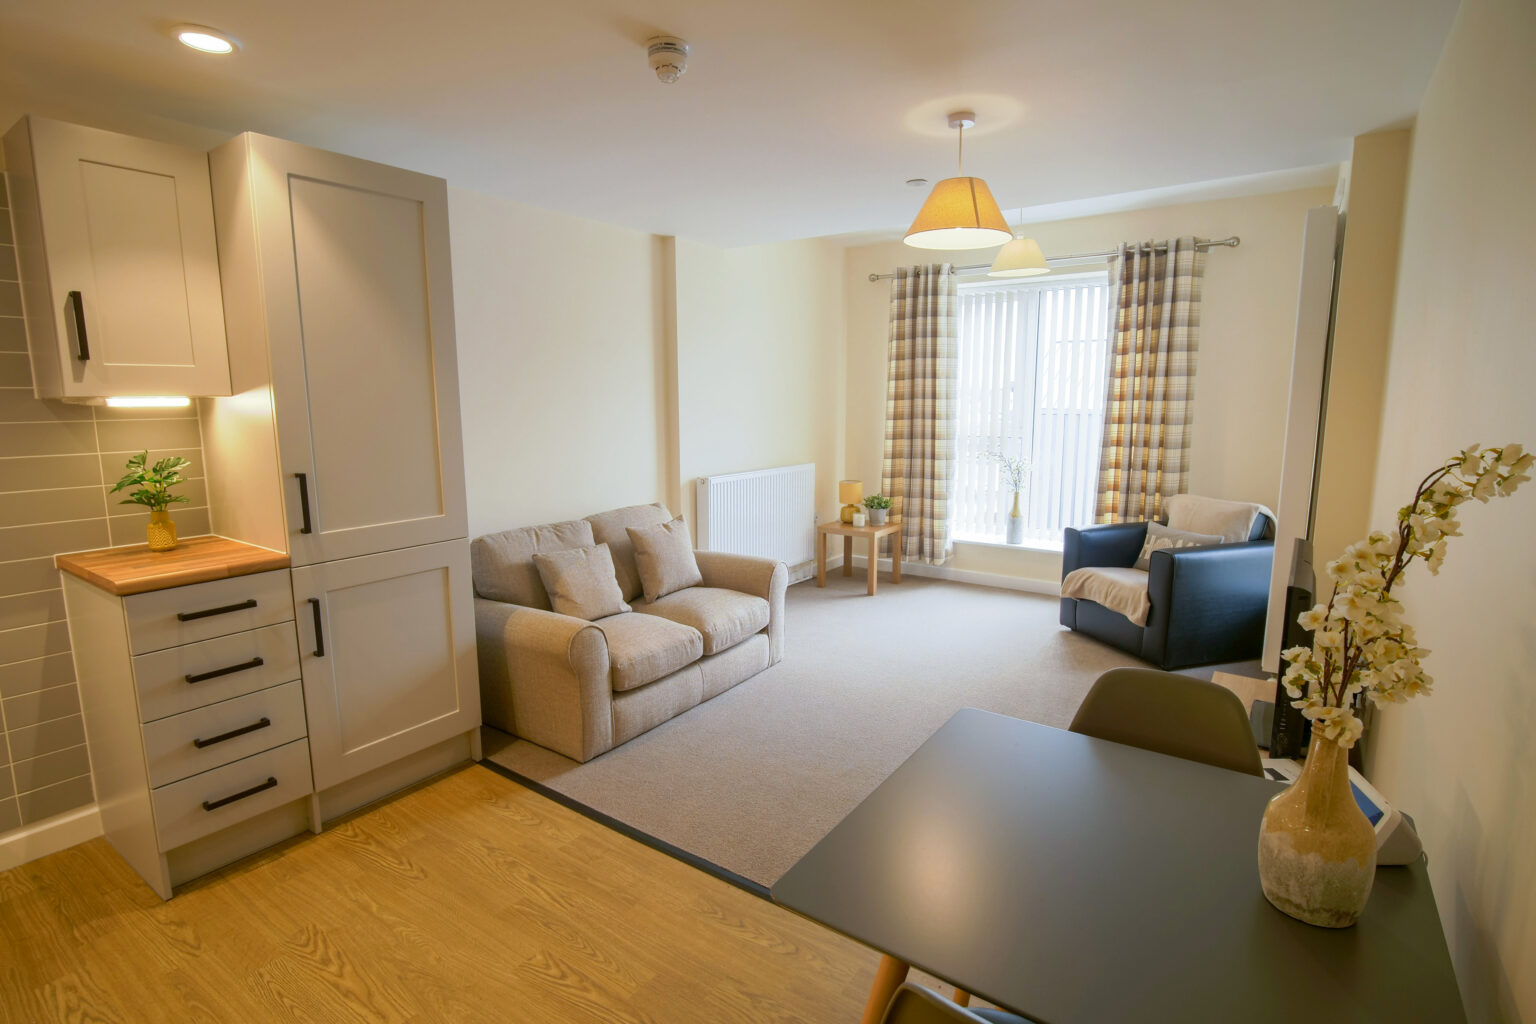 Refurbished Sheltered Housing scheme at Tir y Capel welcomes tenants